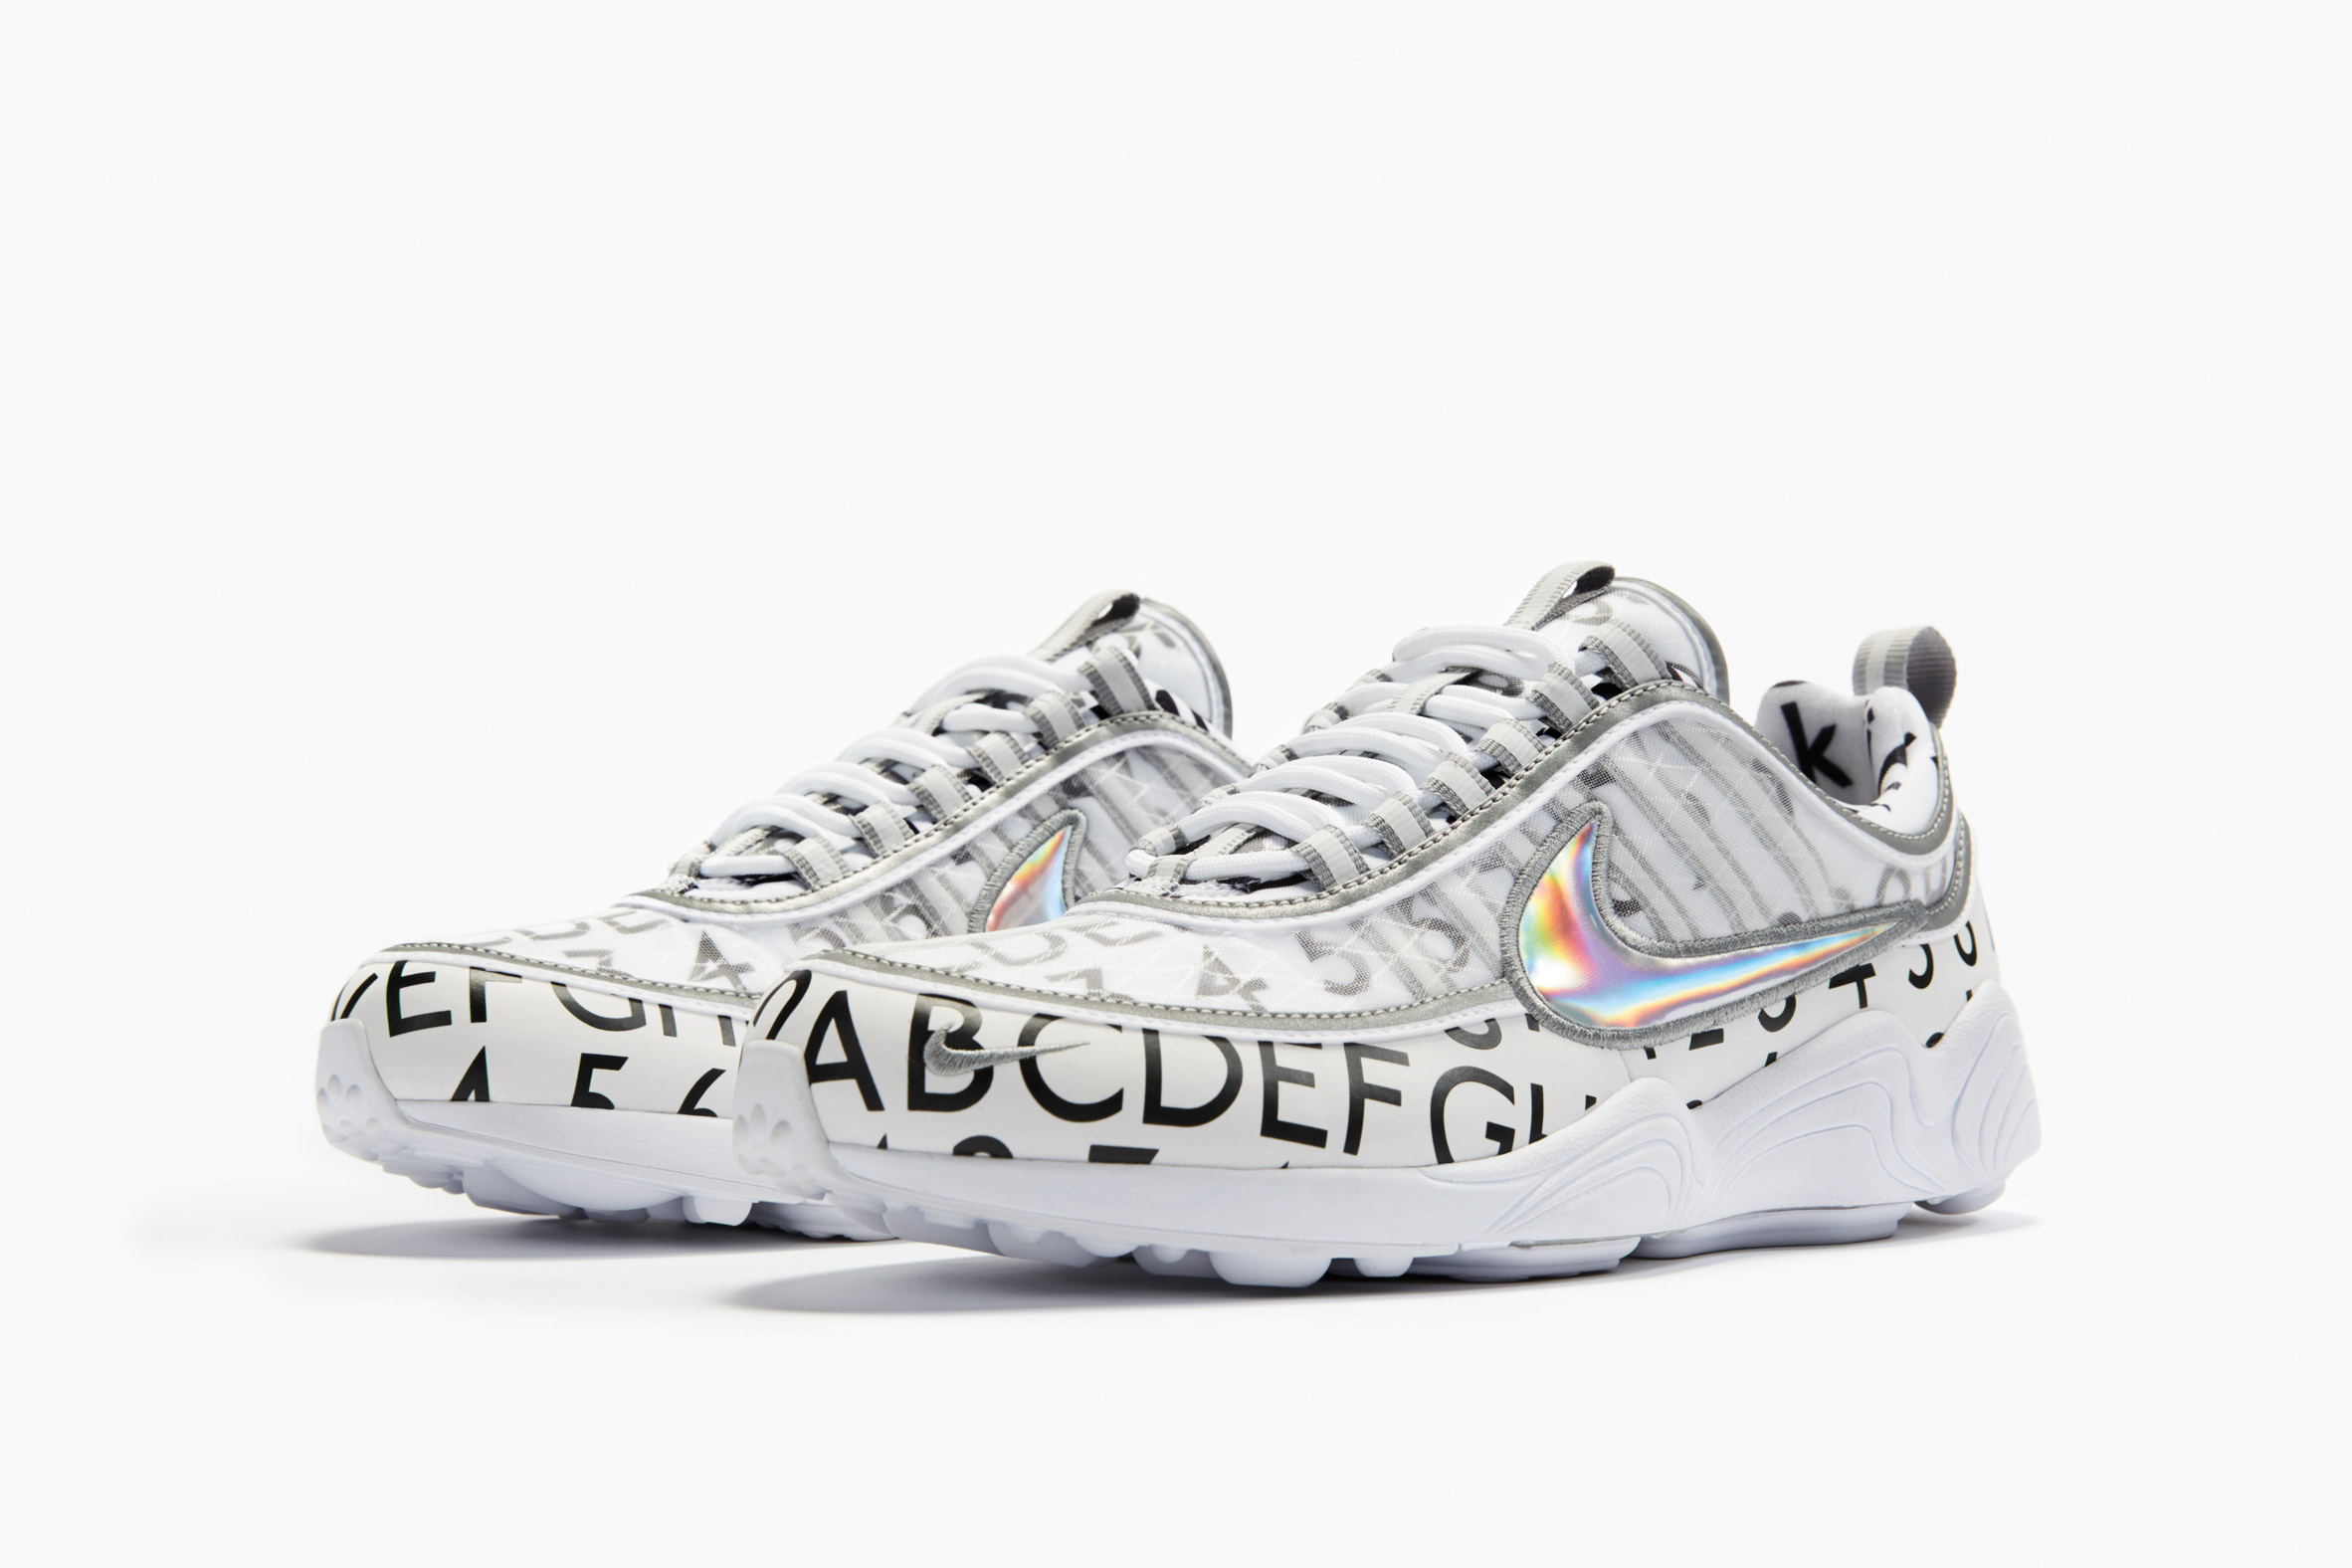 Nike's Zoom Spiridon have covered in London font